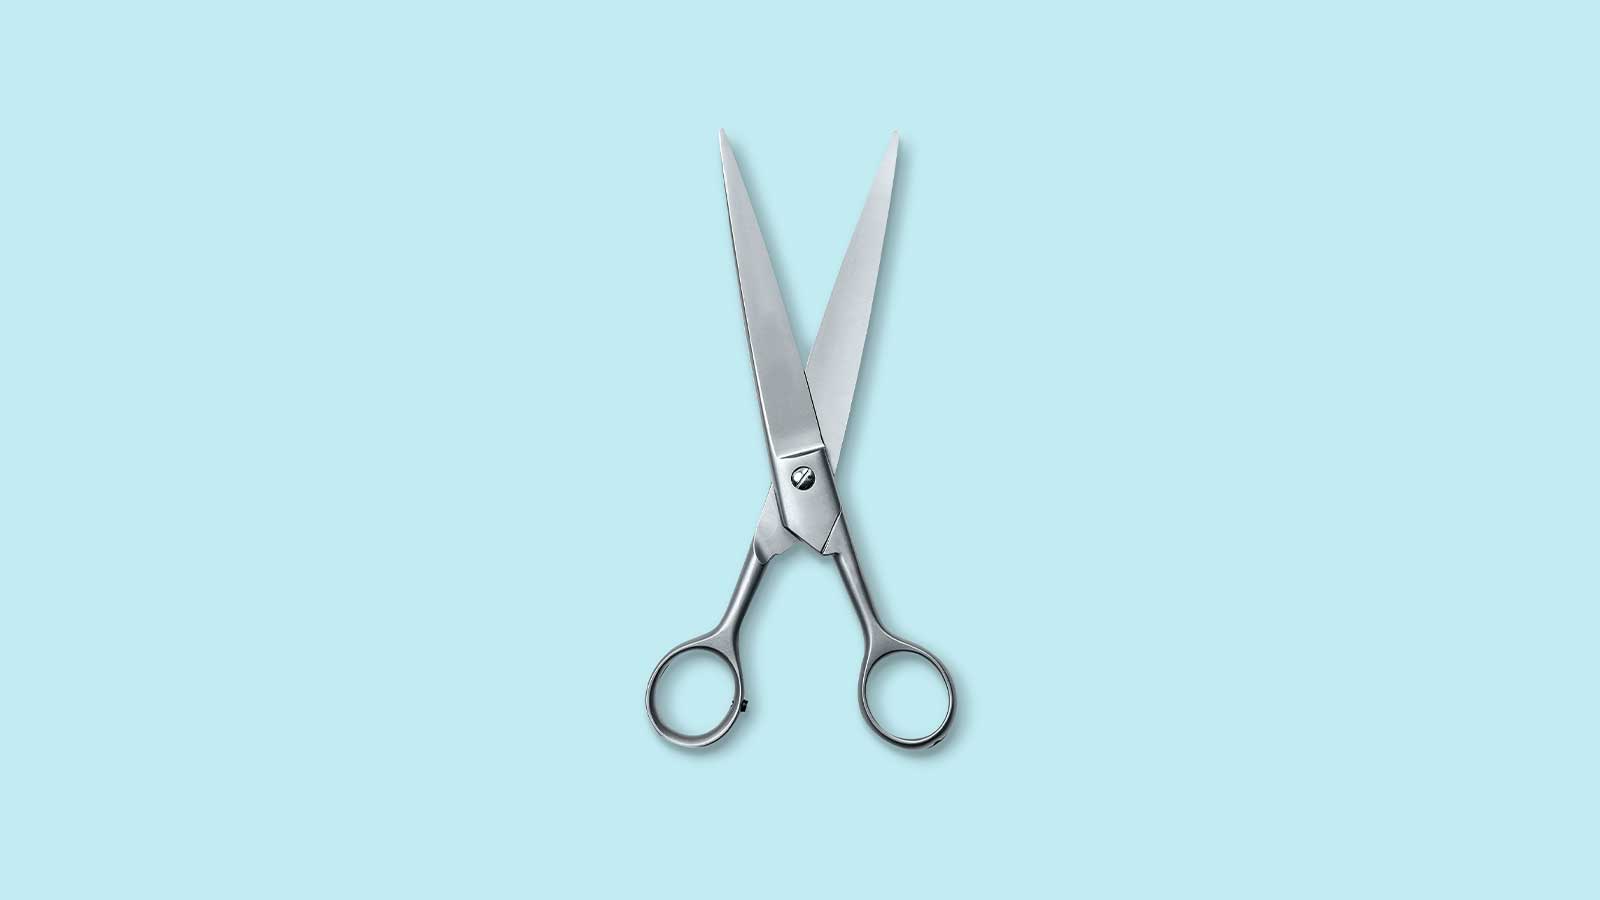 A pair of silver scissors